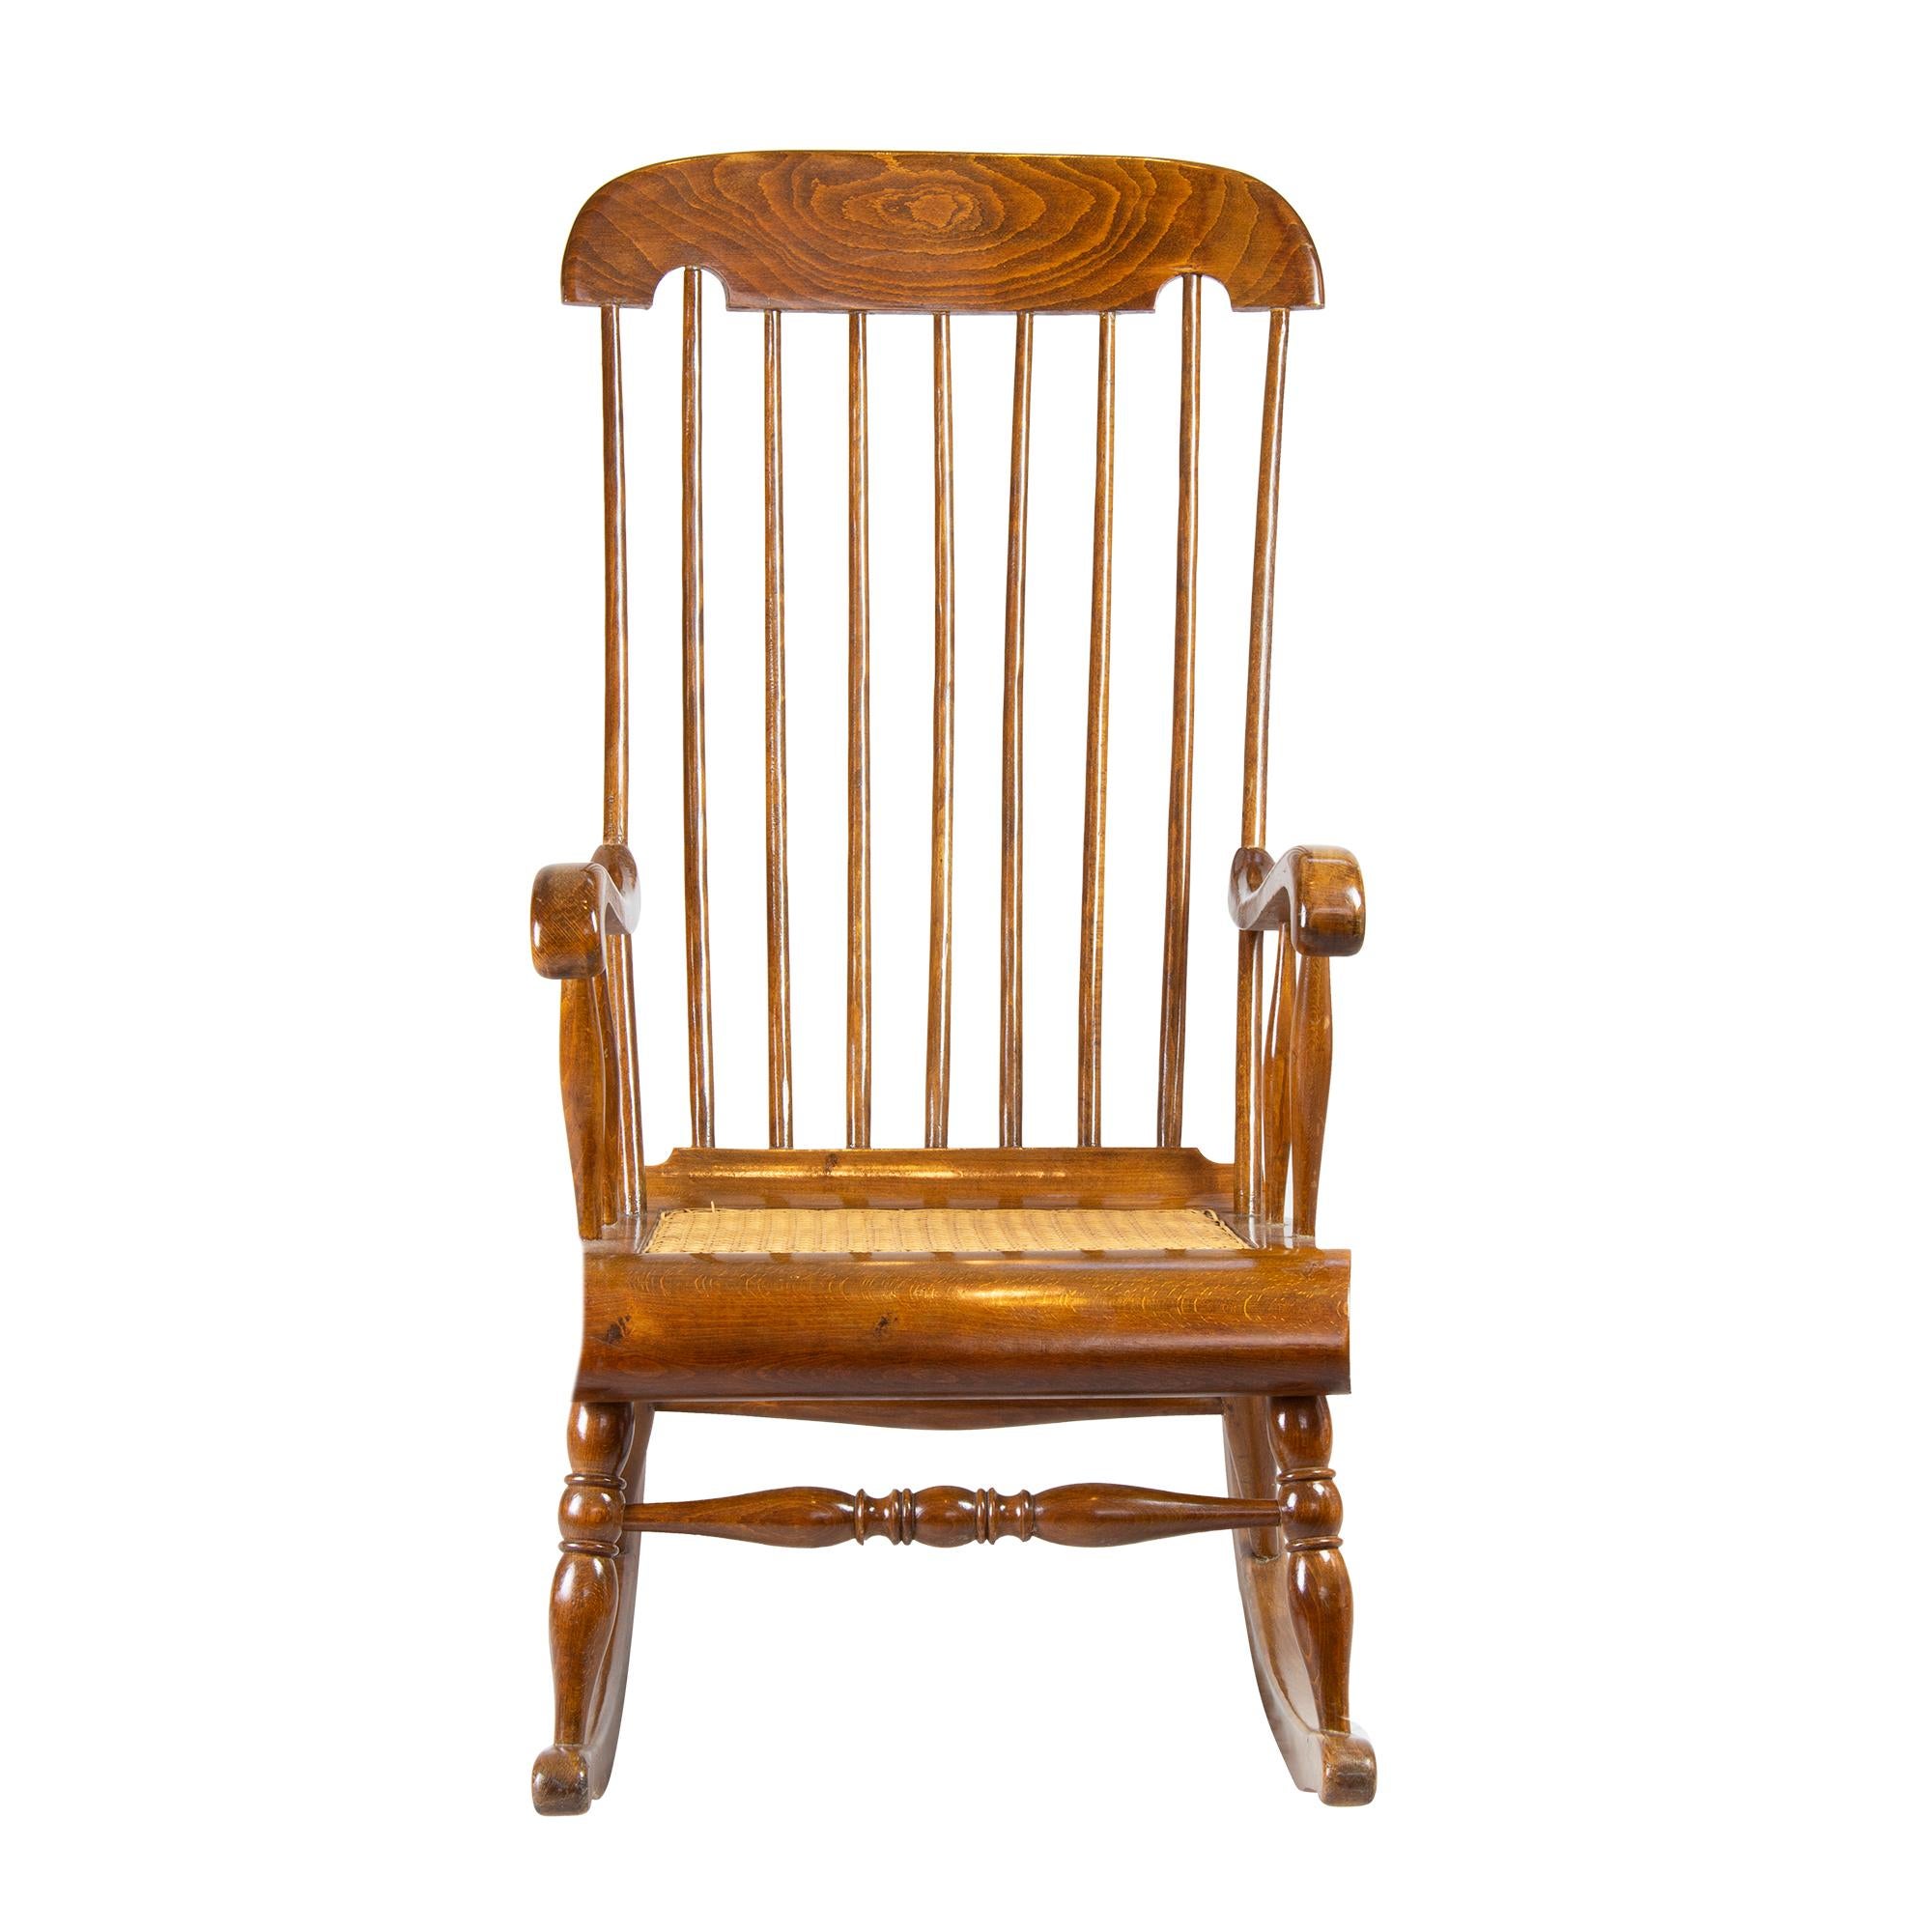 The armrest rocking chair was made of solid beech wood. The seat is woven with cane. The back and headrest is pulled up very far. The chair dates from around 1900.